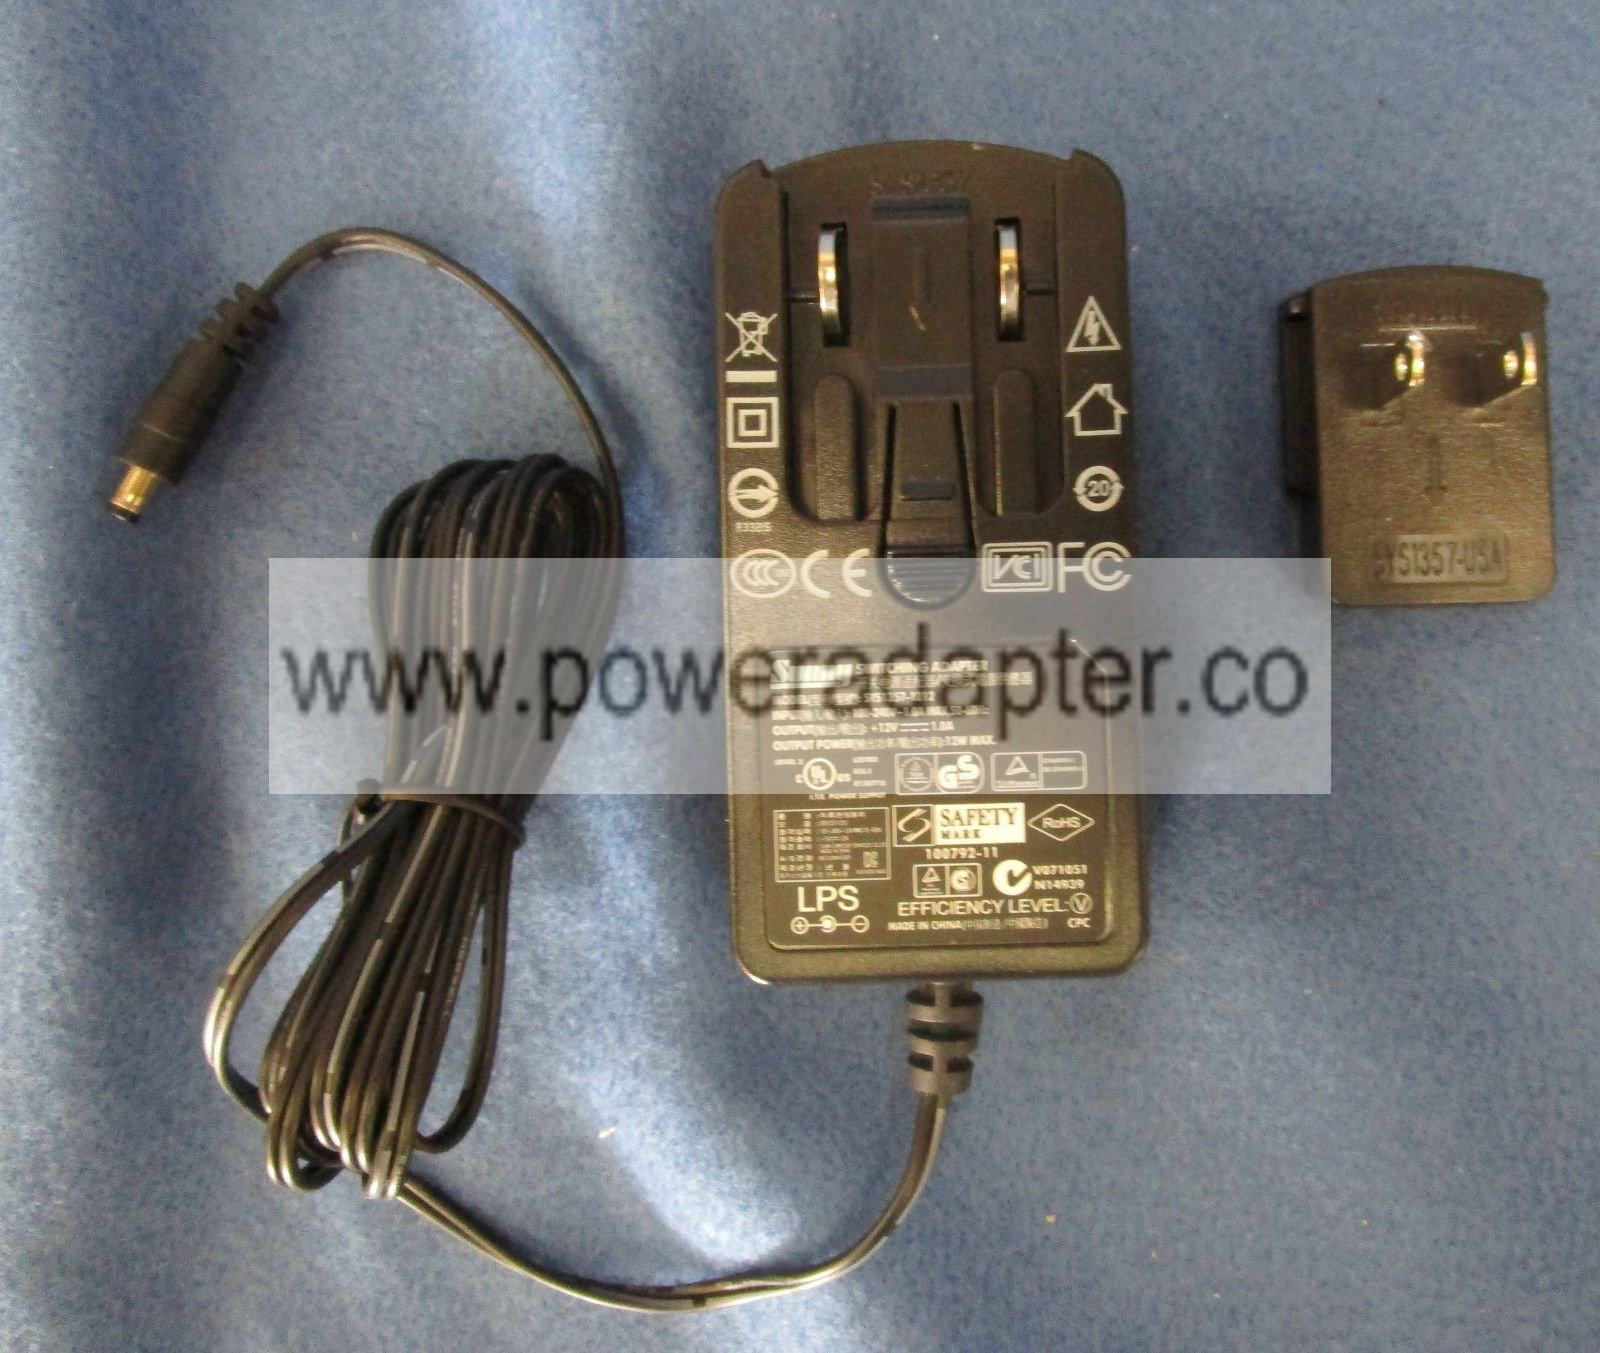 Sunny SYS1357-1212 Switching AC Power Adapter 24W 12V 1A US Plug Type: AC/Standard Max. Output Power: 24W MPN: SYS13